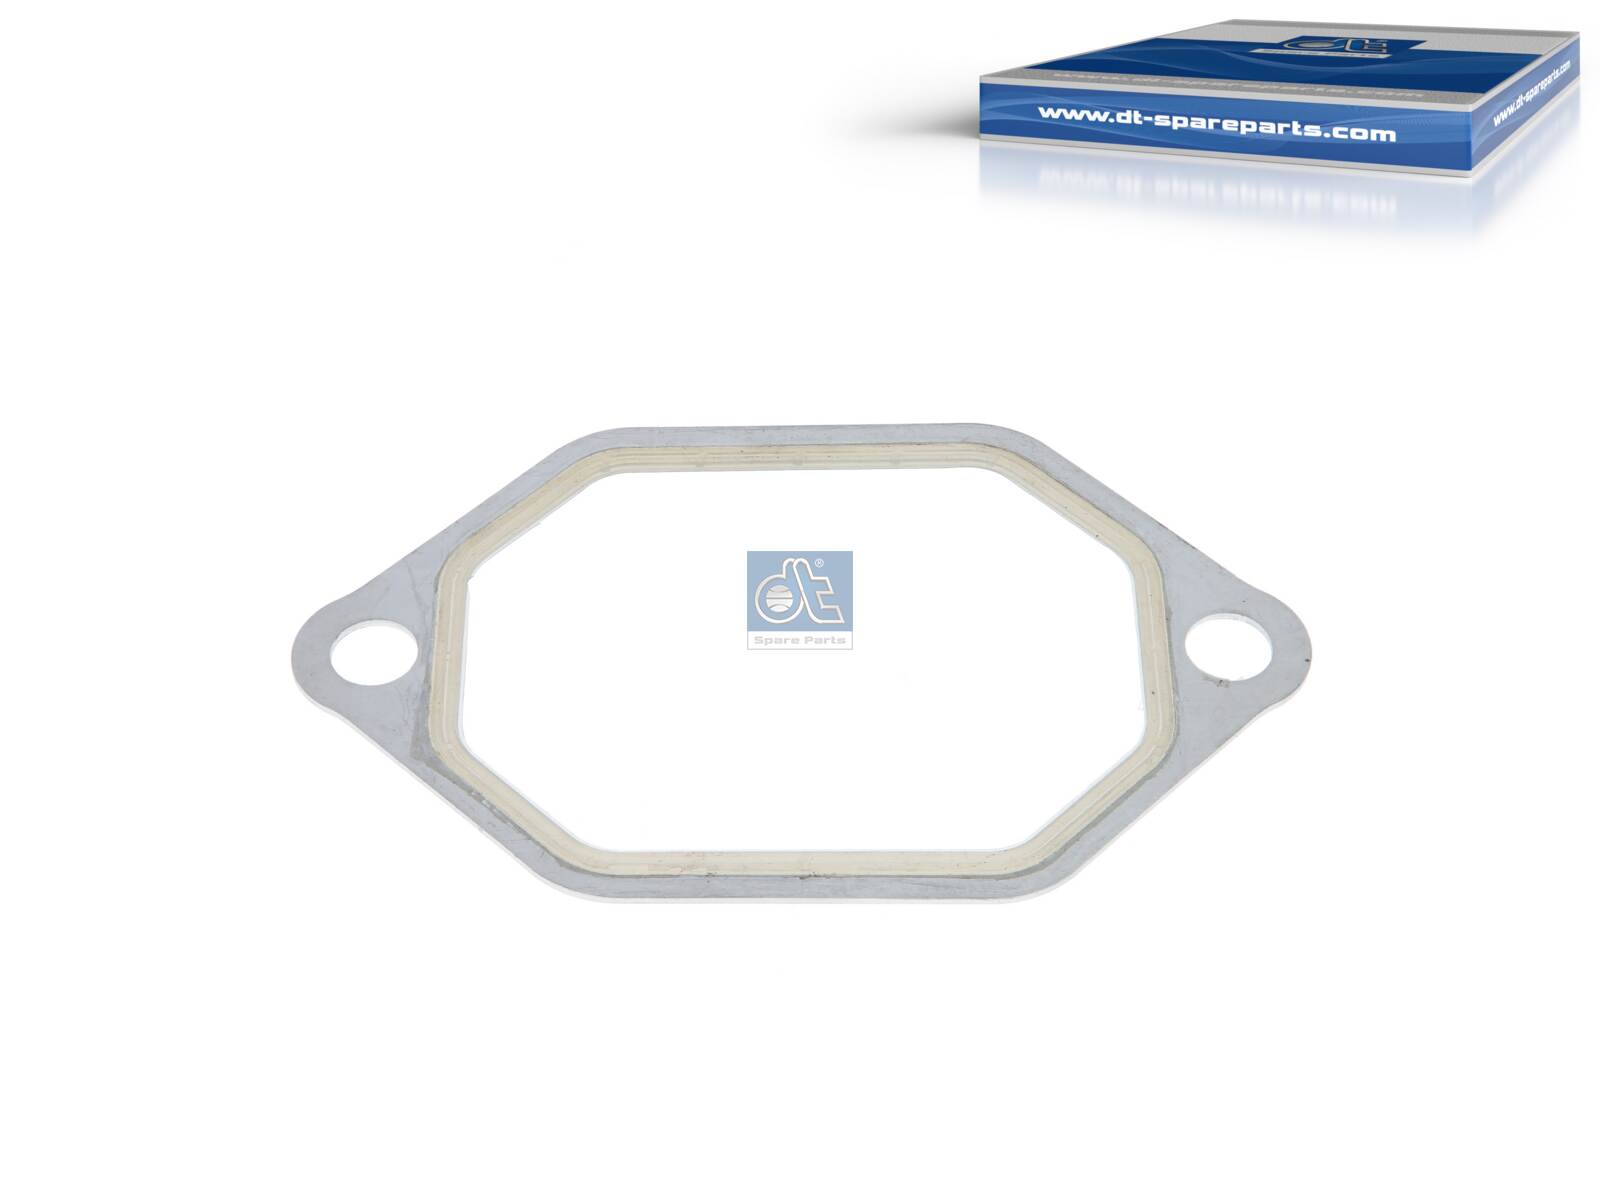 4.20390, Gasket, intake manifold, DT Spare Parts, 4421410980, A4421410980, 09038, 202.120, 21400.51, 70-29290-00, 764.485, 95908